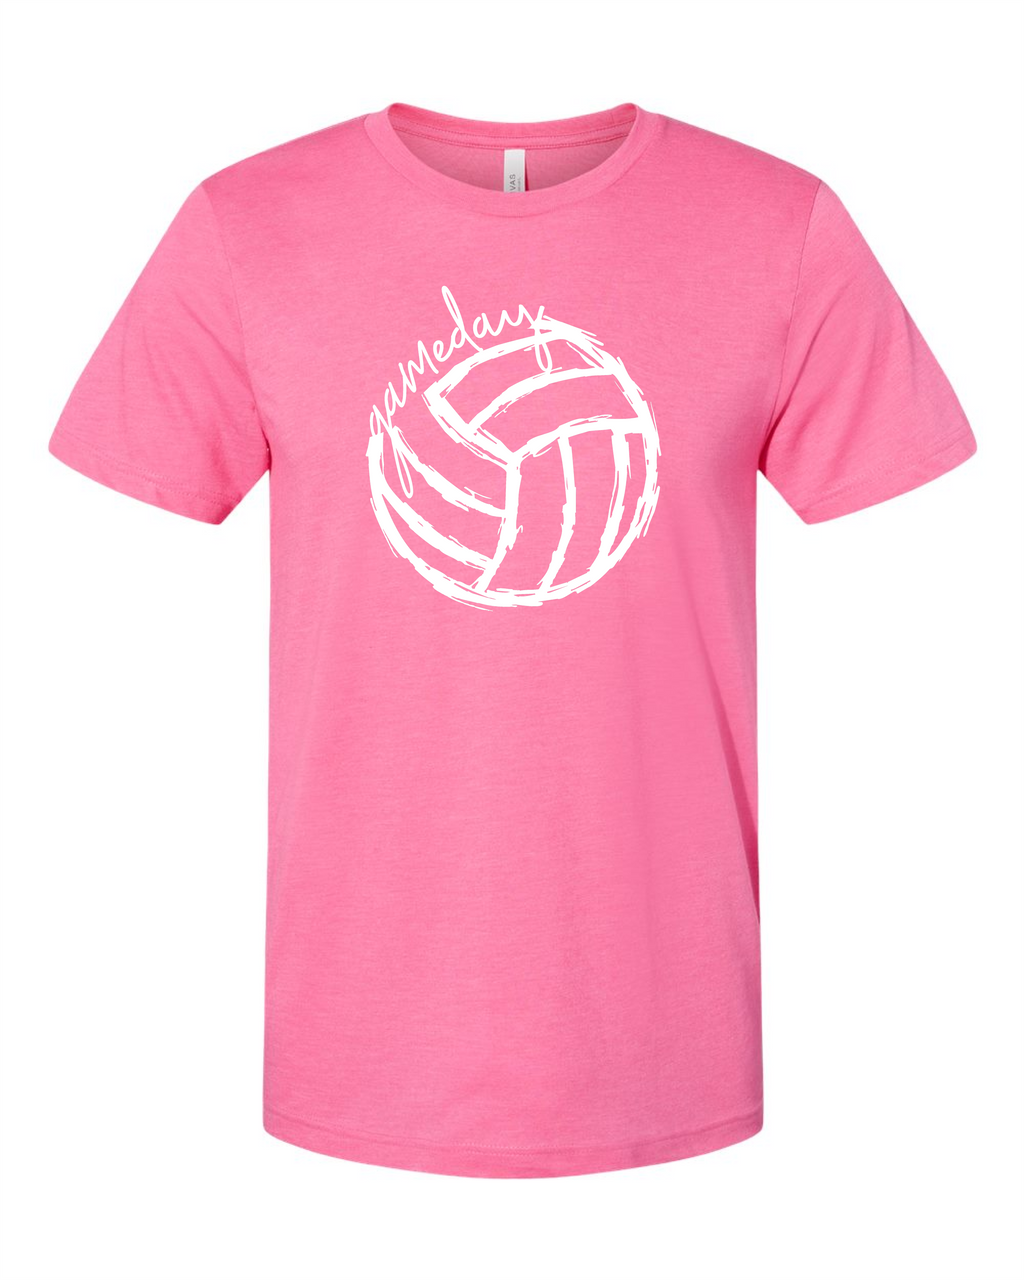 volleyball gameday tee in pink, red or deep grey